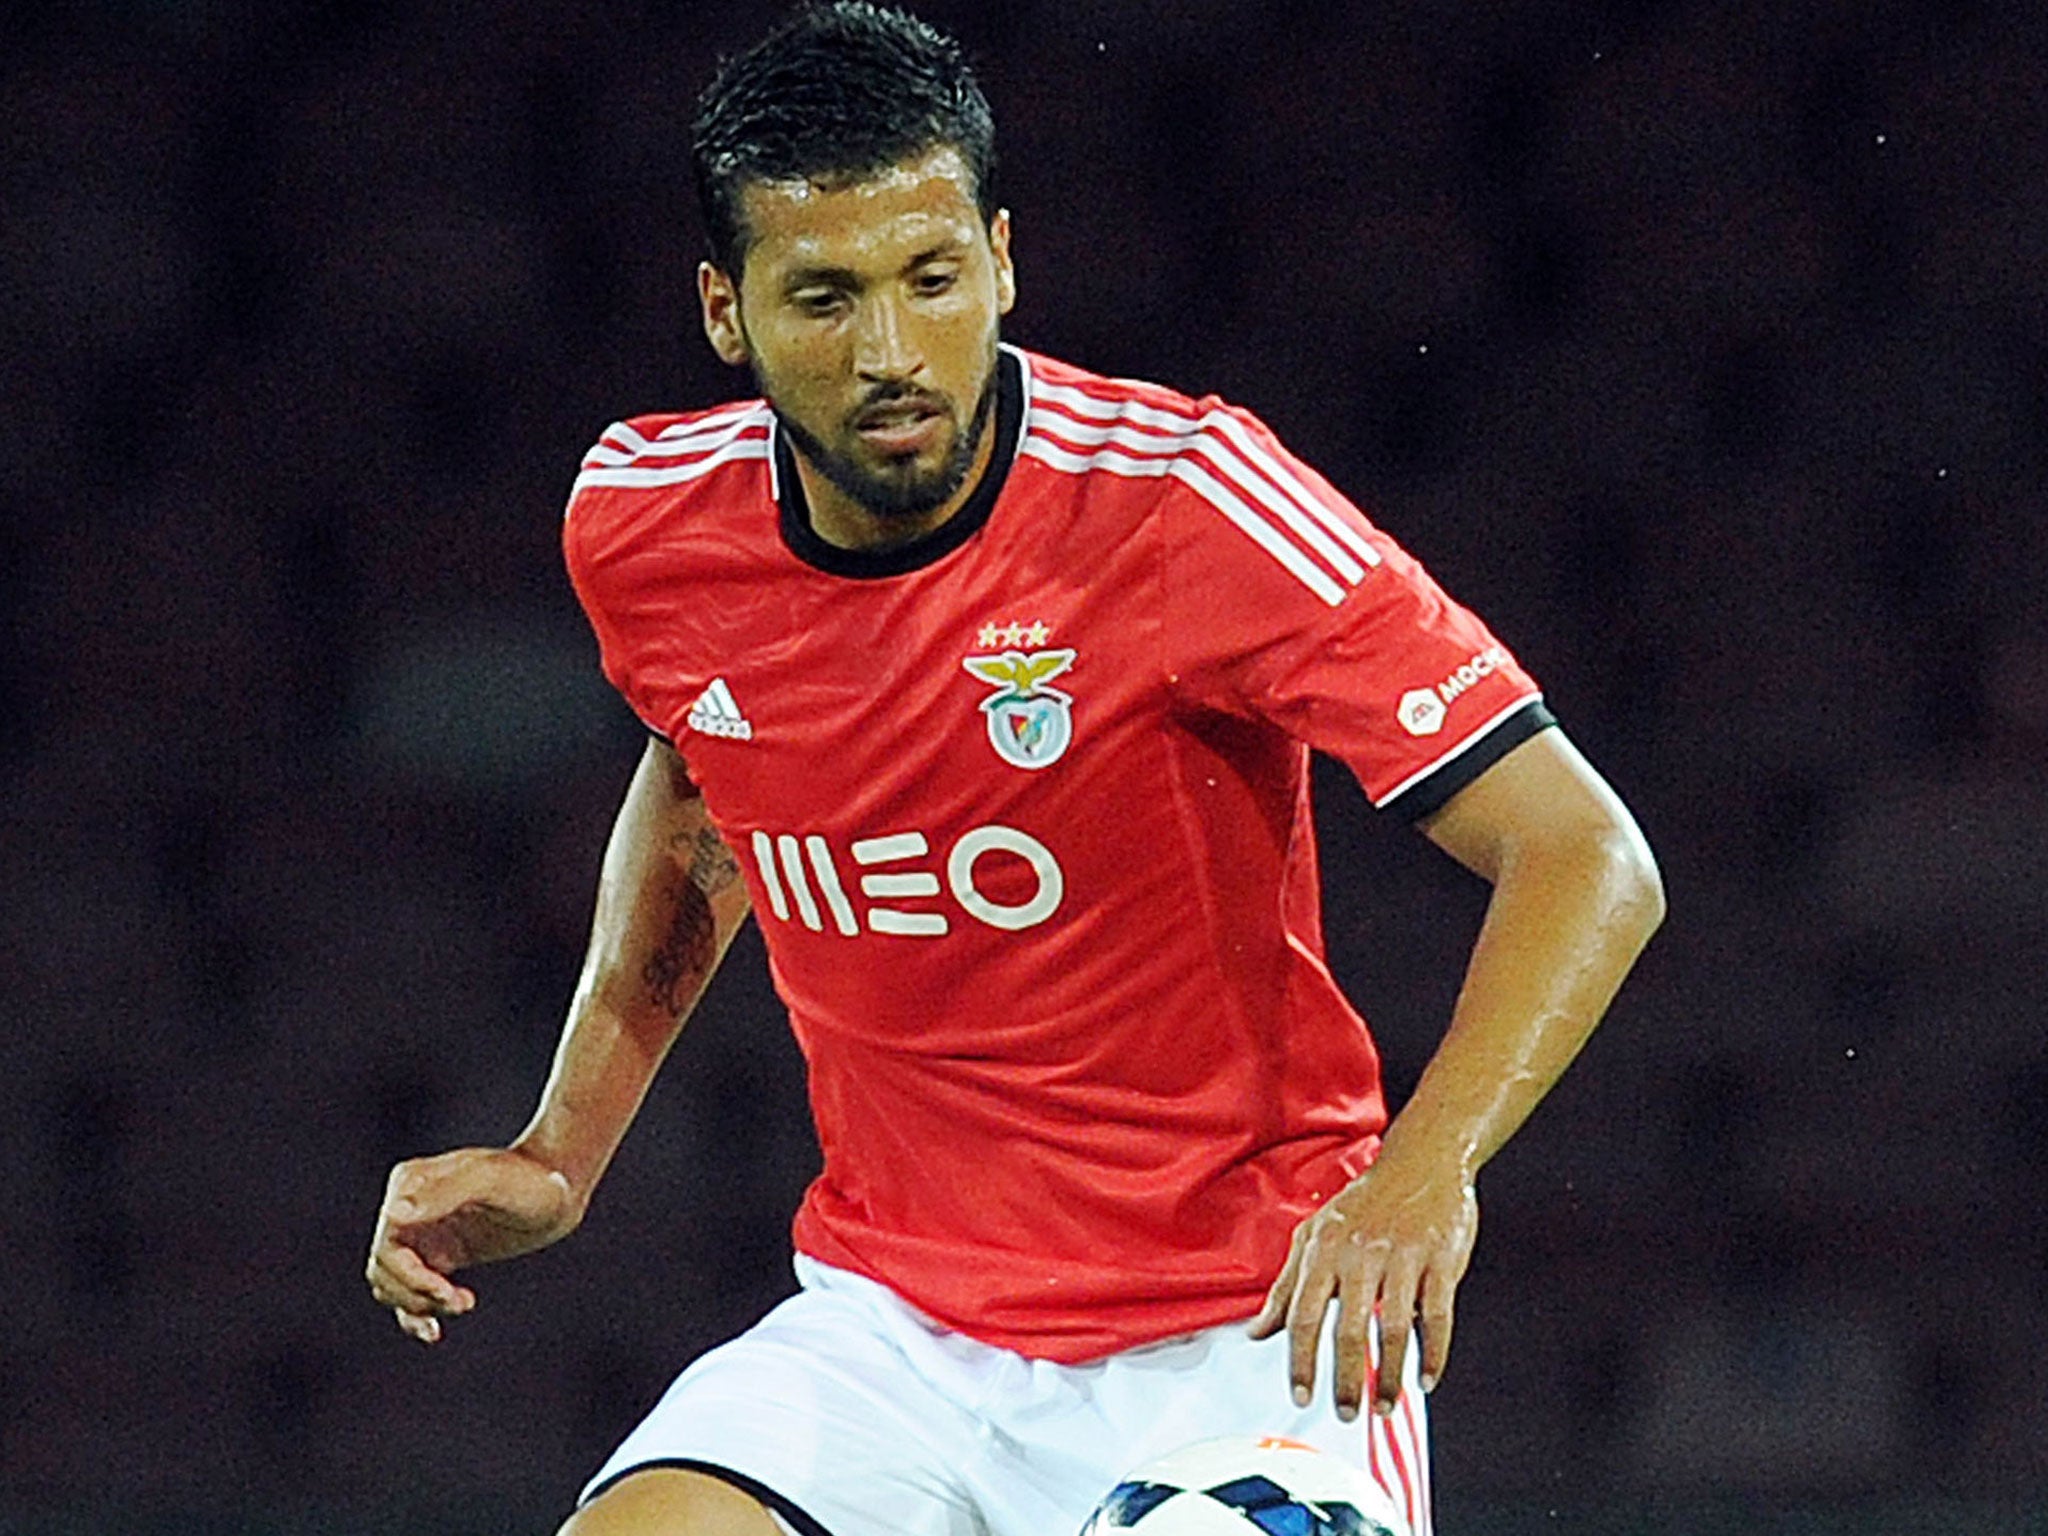 Benfica defender Ezequiel Garay claims David Moyes blocked his move to Manchester United